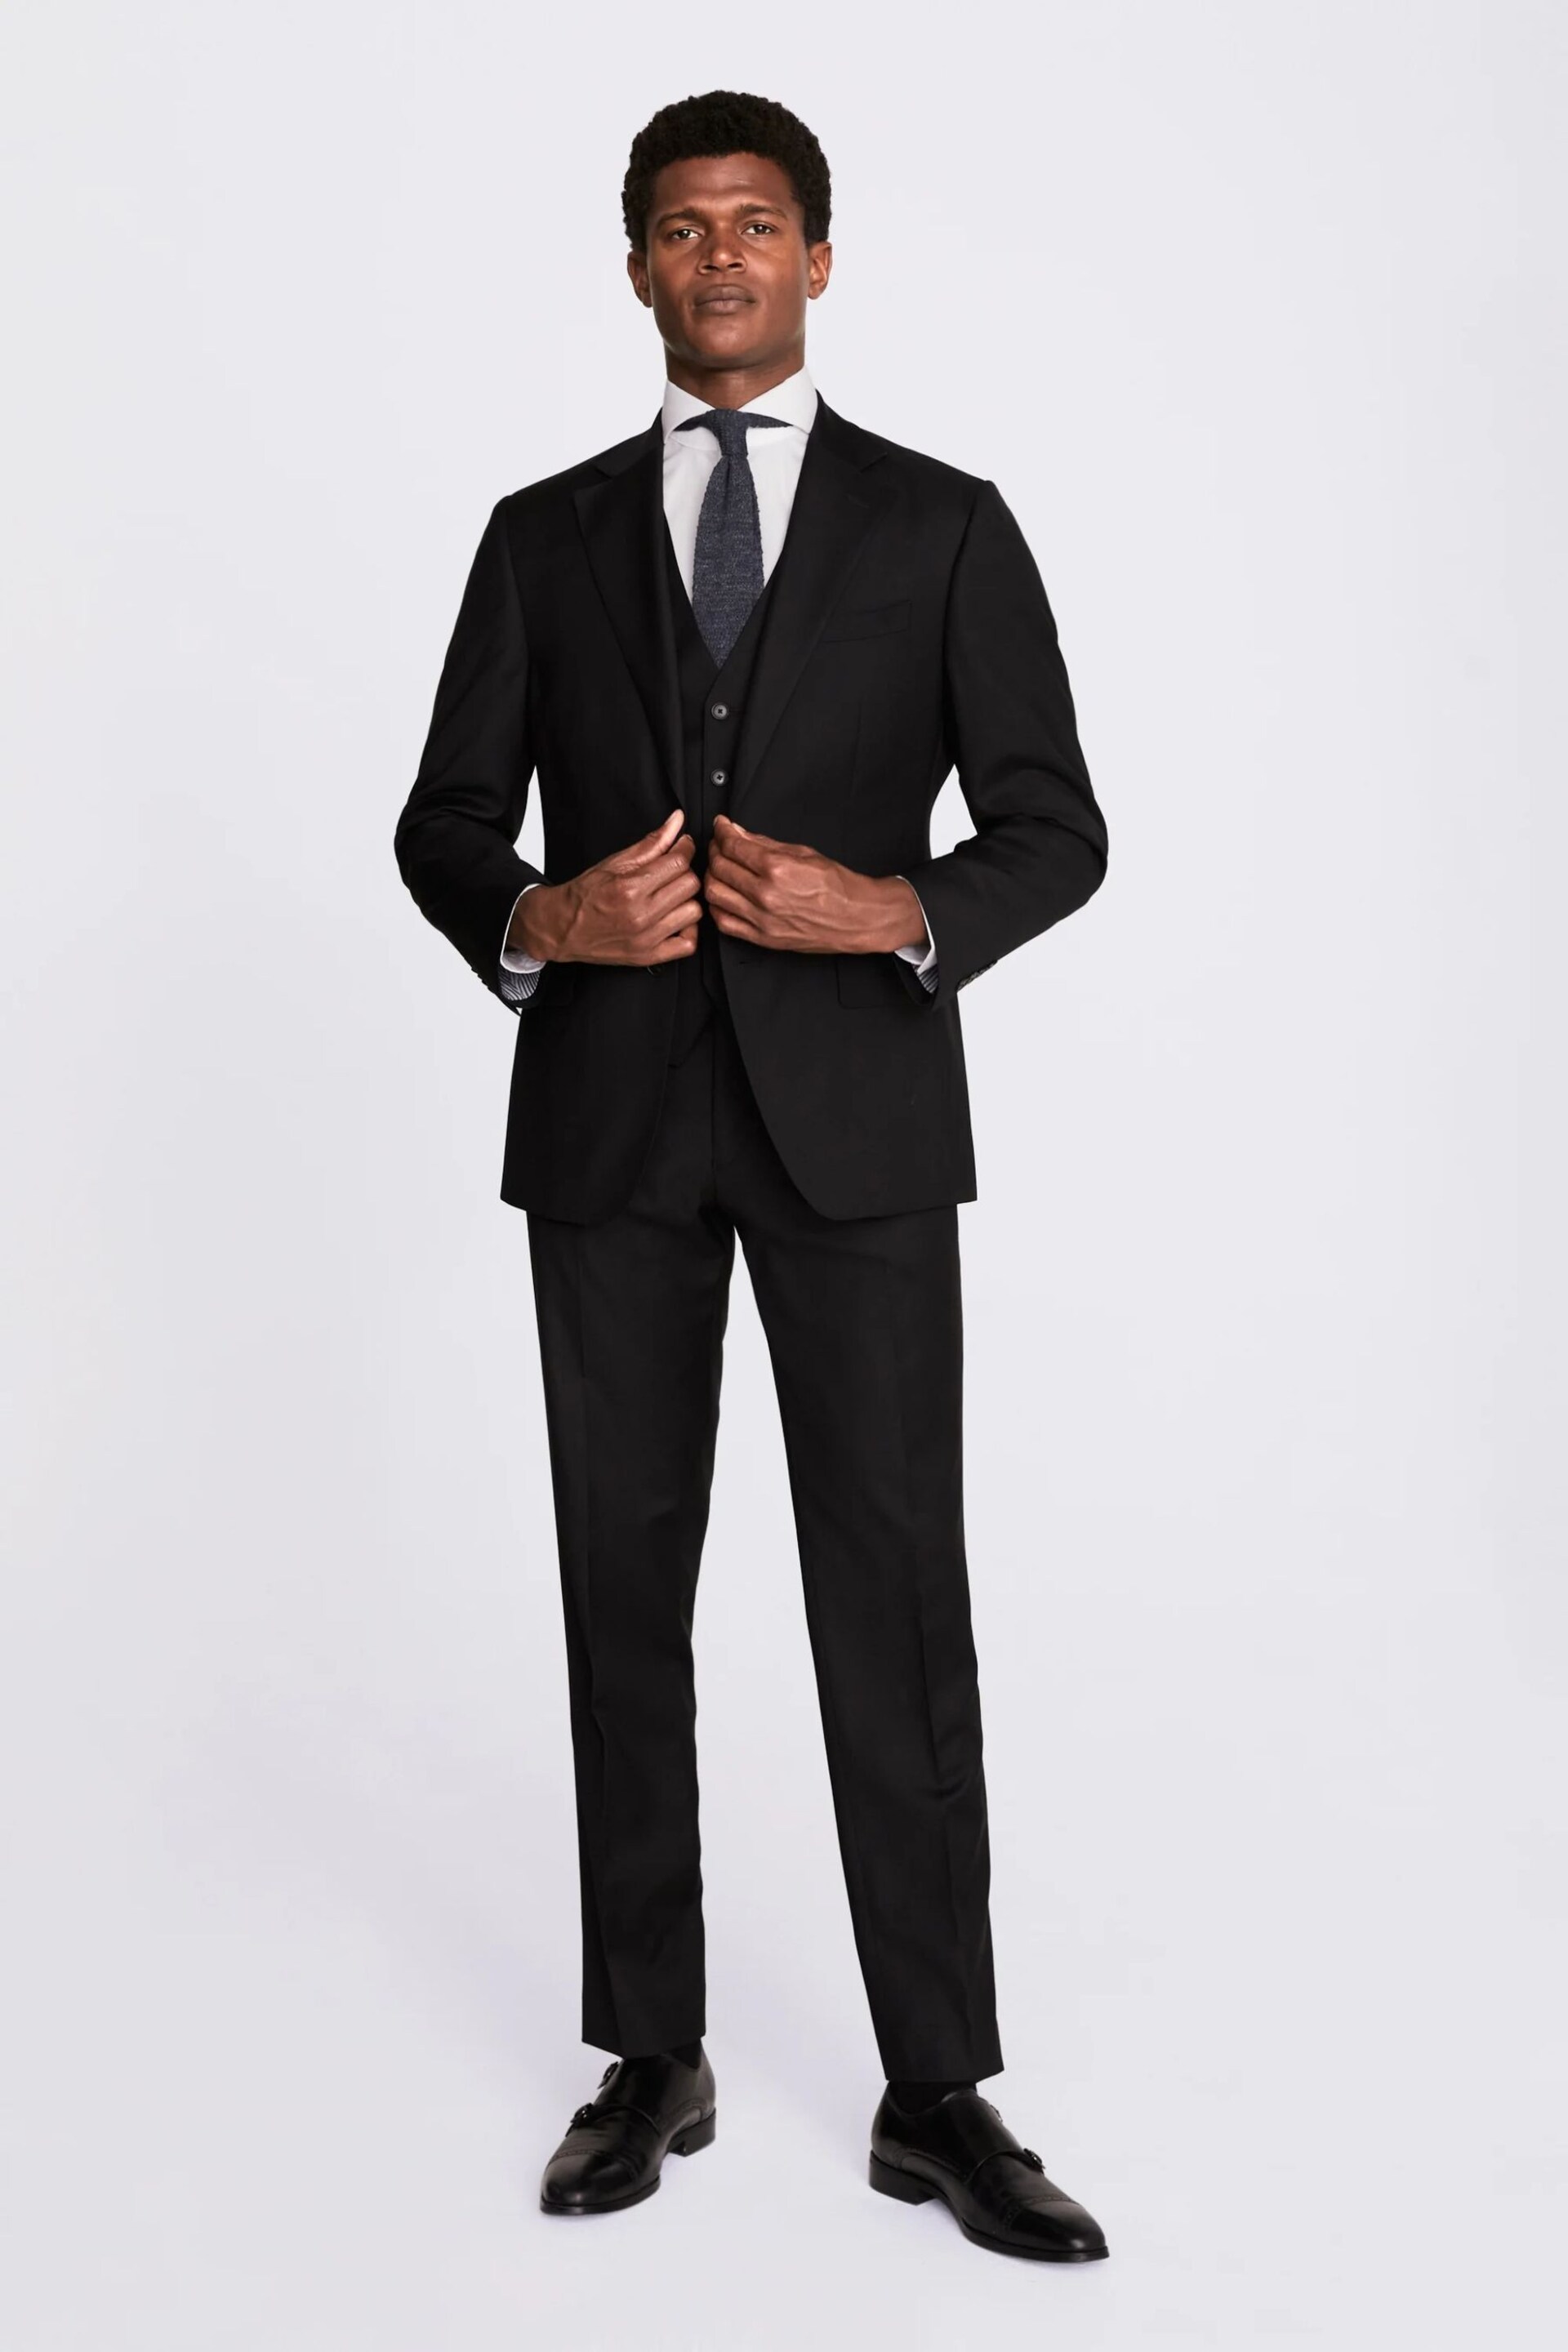 MOSS x Cerruti Black Tailored Fit Twill Suit Jacket - Image 4 of 7